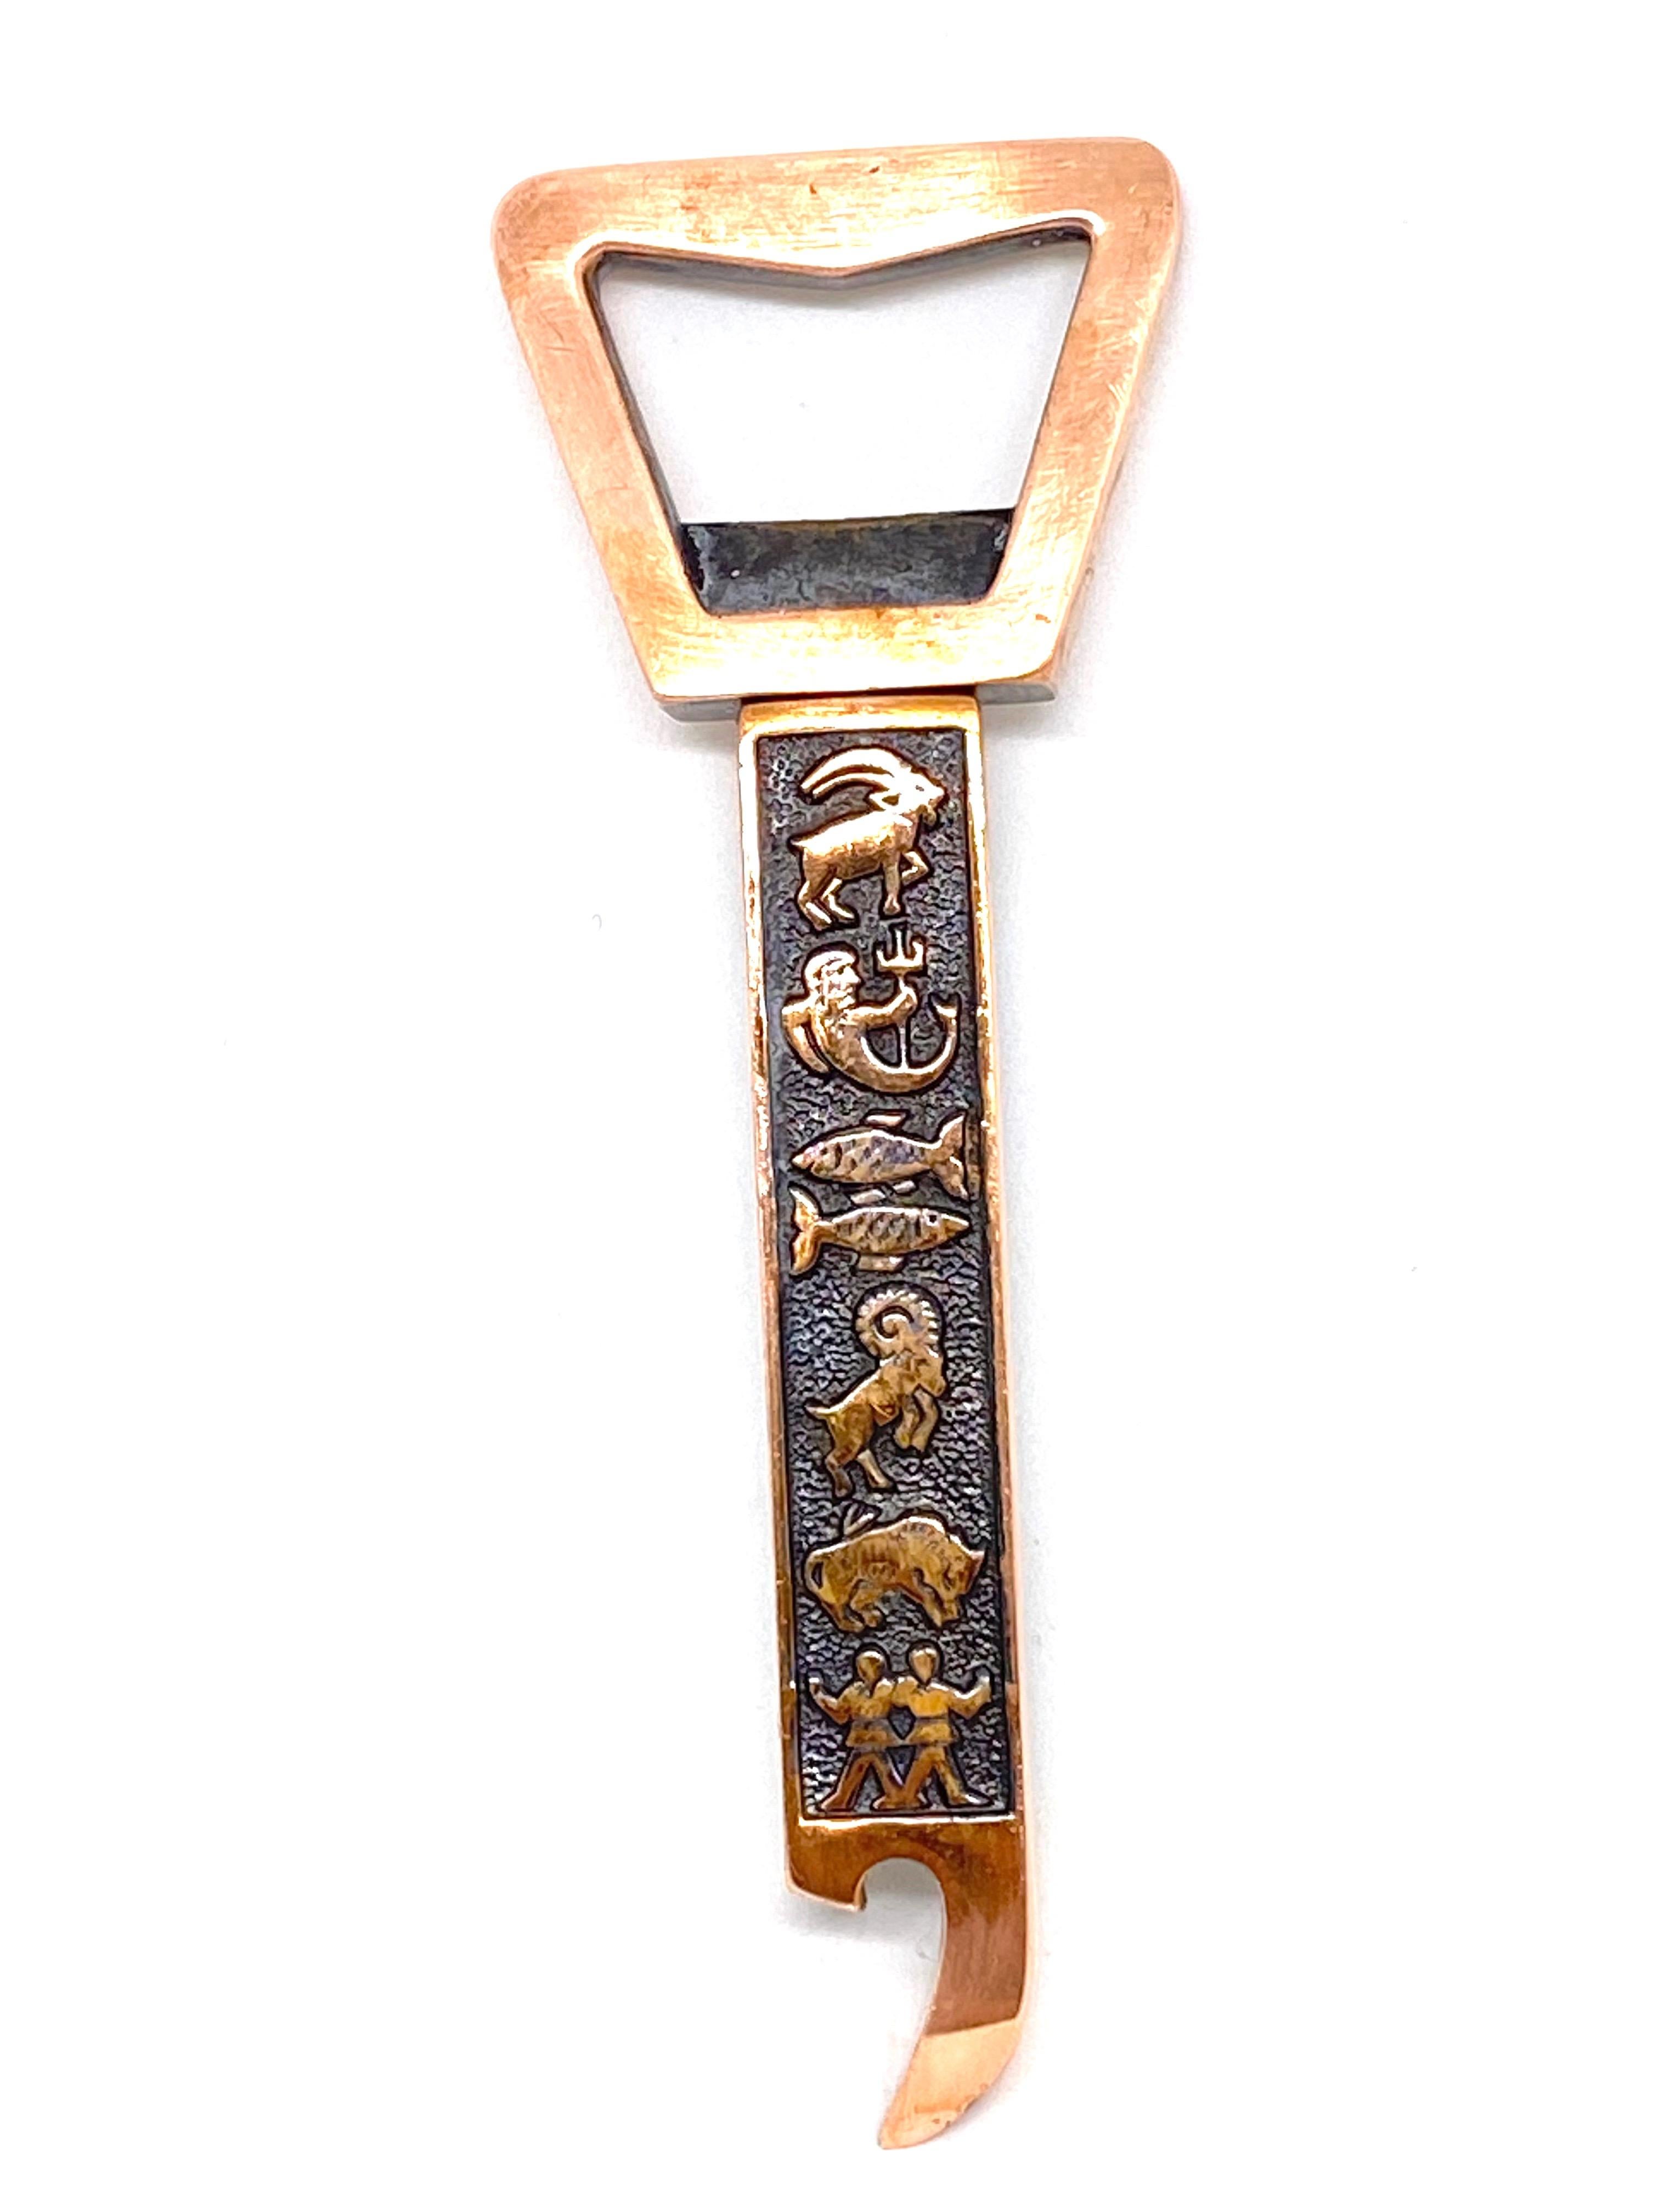 German Zodiac Sign Corkscrew and Bottle Opener, 1950s, Mid-Century Modern Collectible